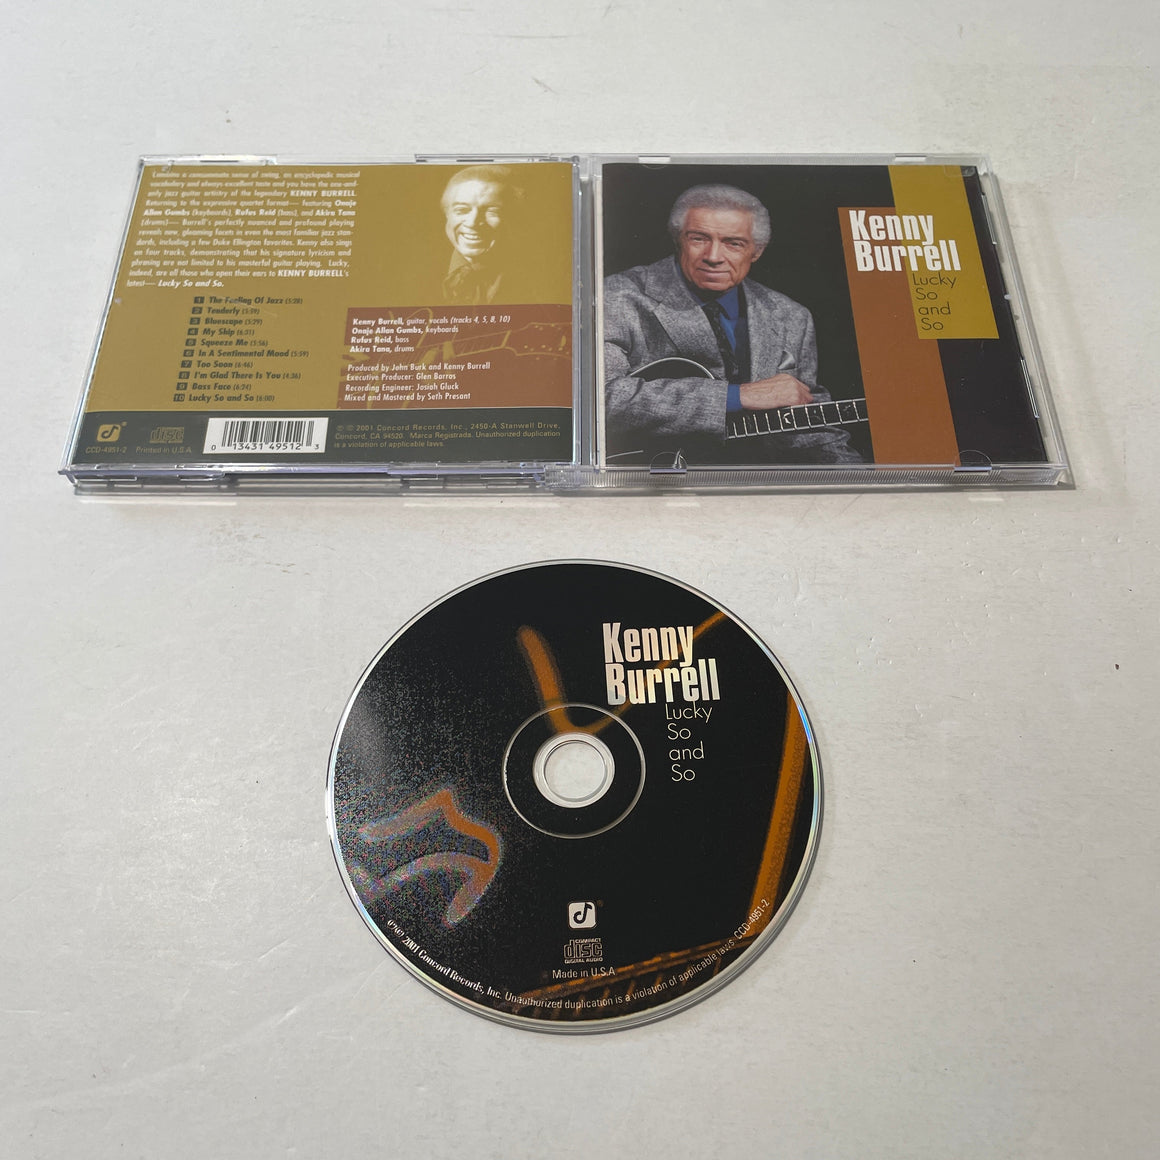 Kenny Burrell Lucky So And So Used CD VG+\VG+